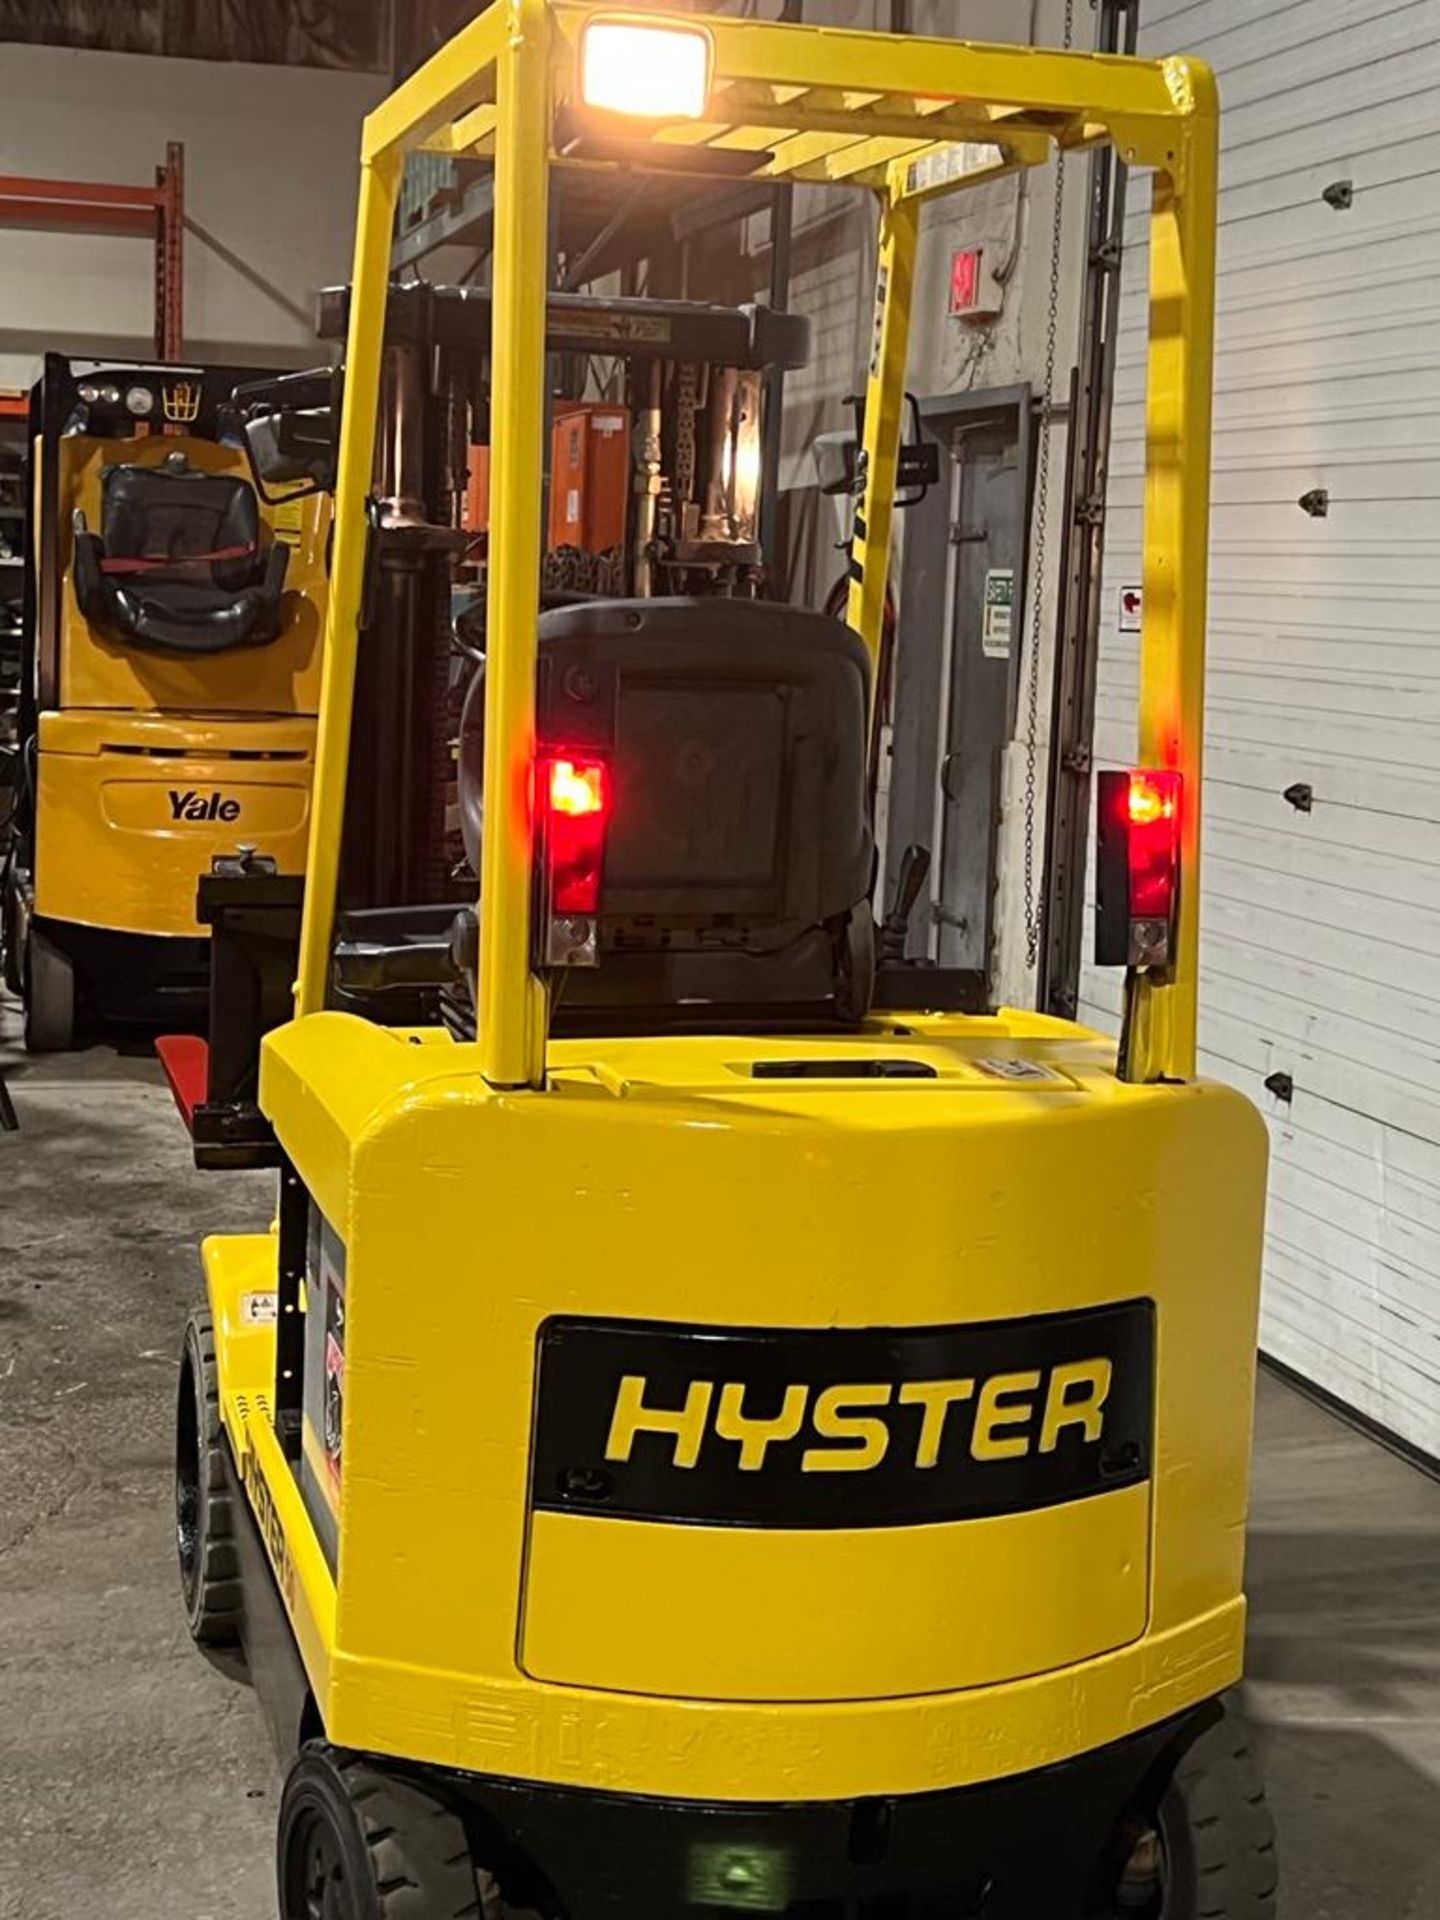 Hyster 5,000lbs Capacity Forklift Electric with Sideshift and 3-stage Mast - FREE CUSTOMS - Image 3 of 5